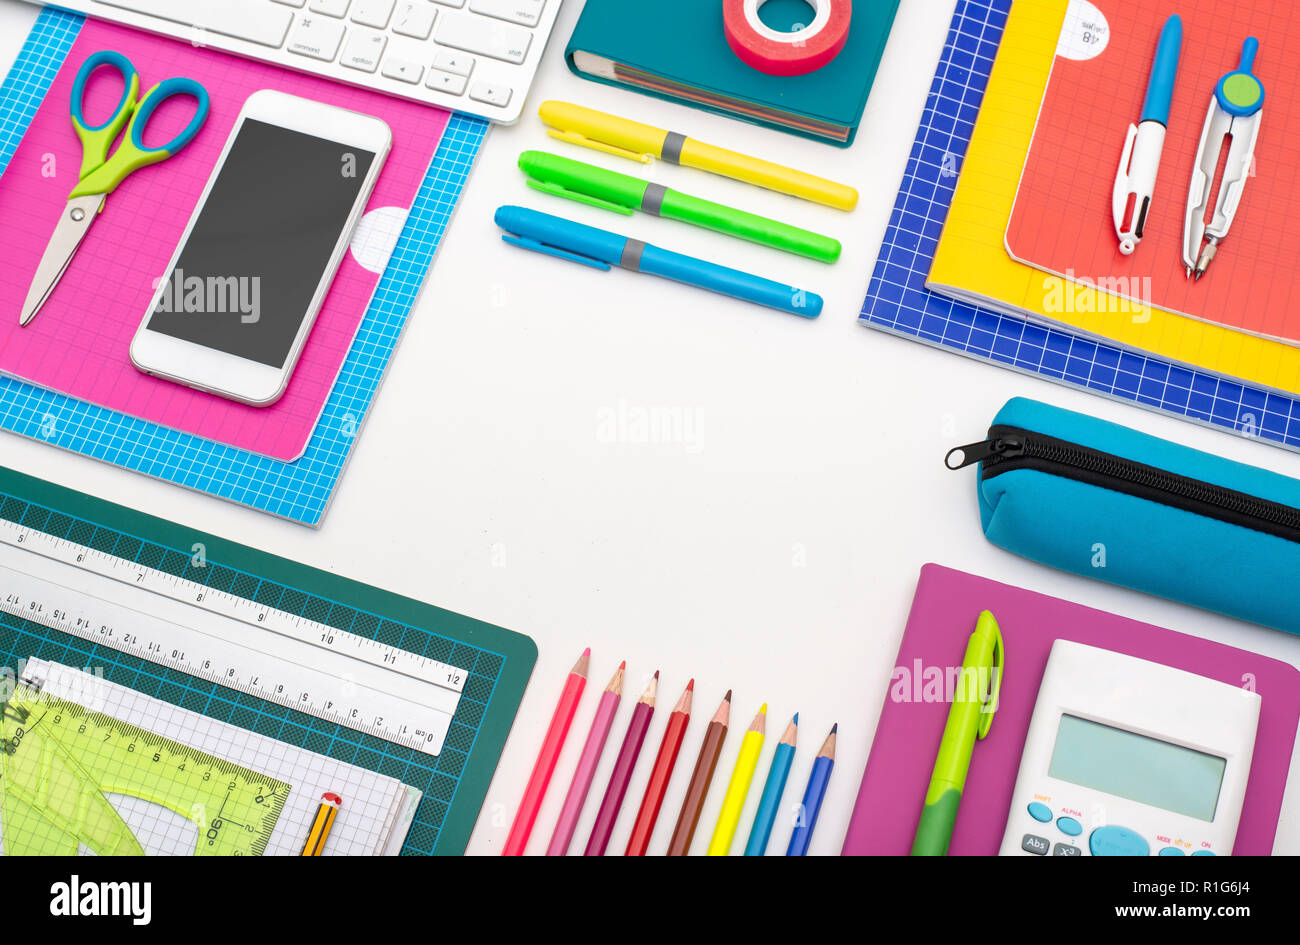 Back to school background header on white. Colorful school items. Mobile application web design template. Stock Photo